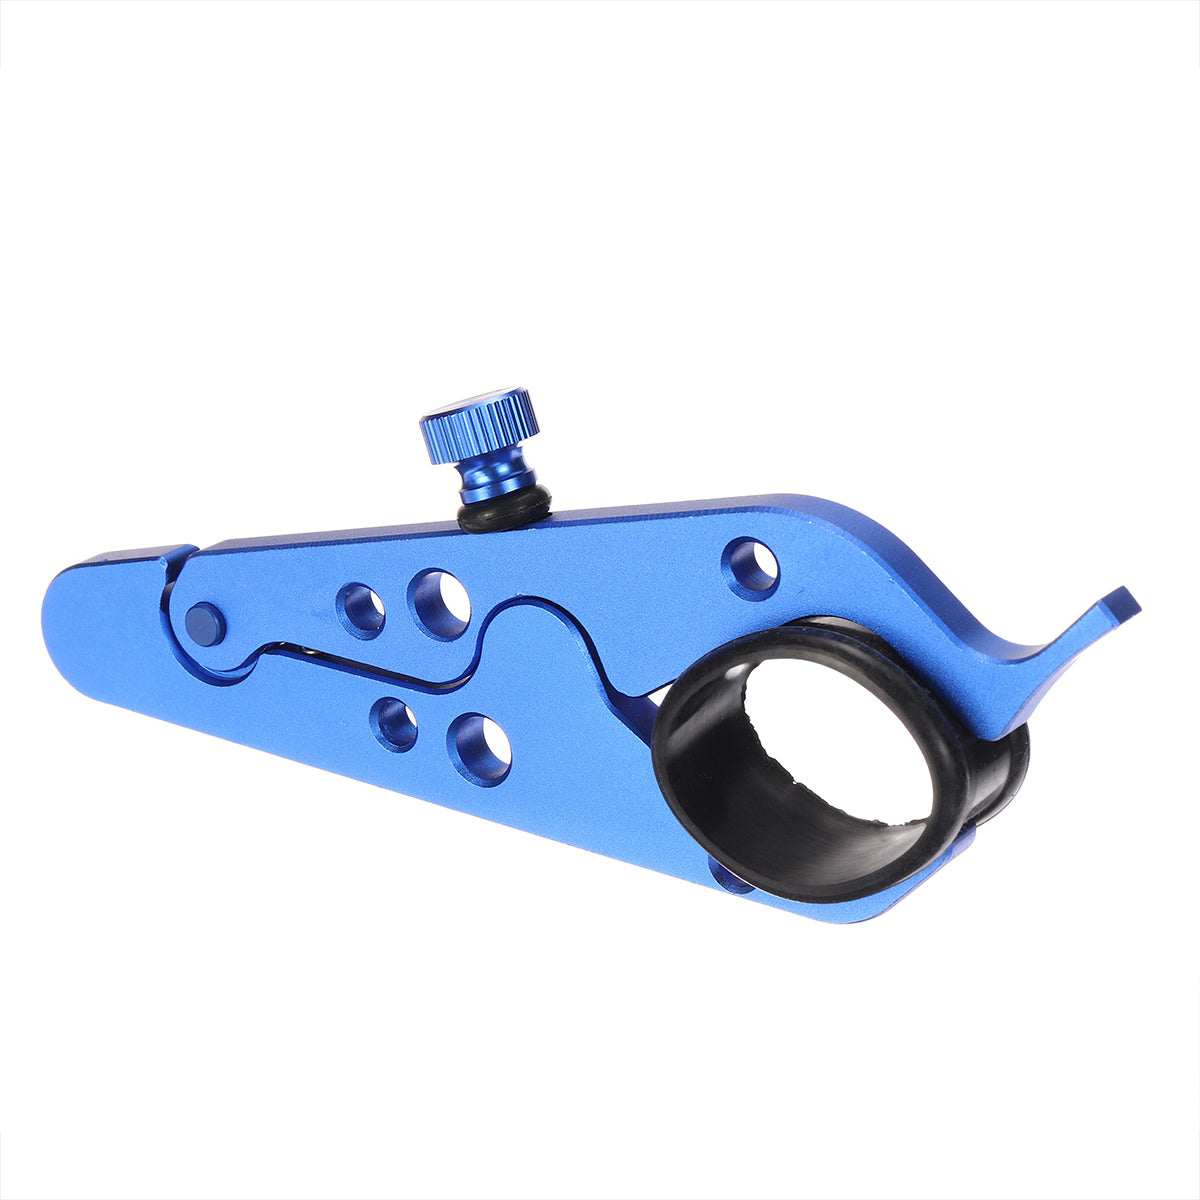 Cornflower Blue Universal Motorcycle Cruise Control Throttle Lock Assist System With Rubber Ring